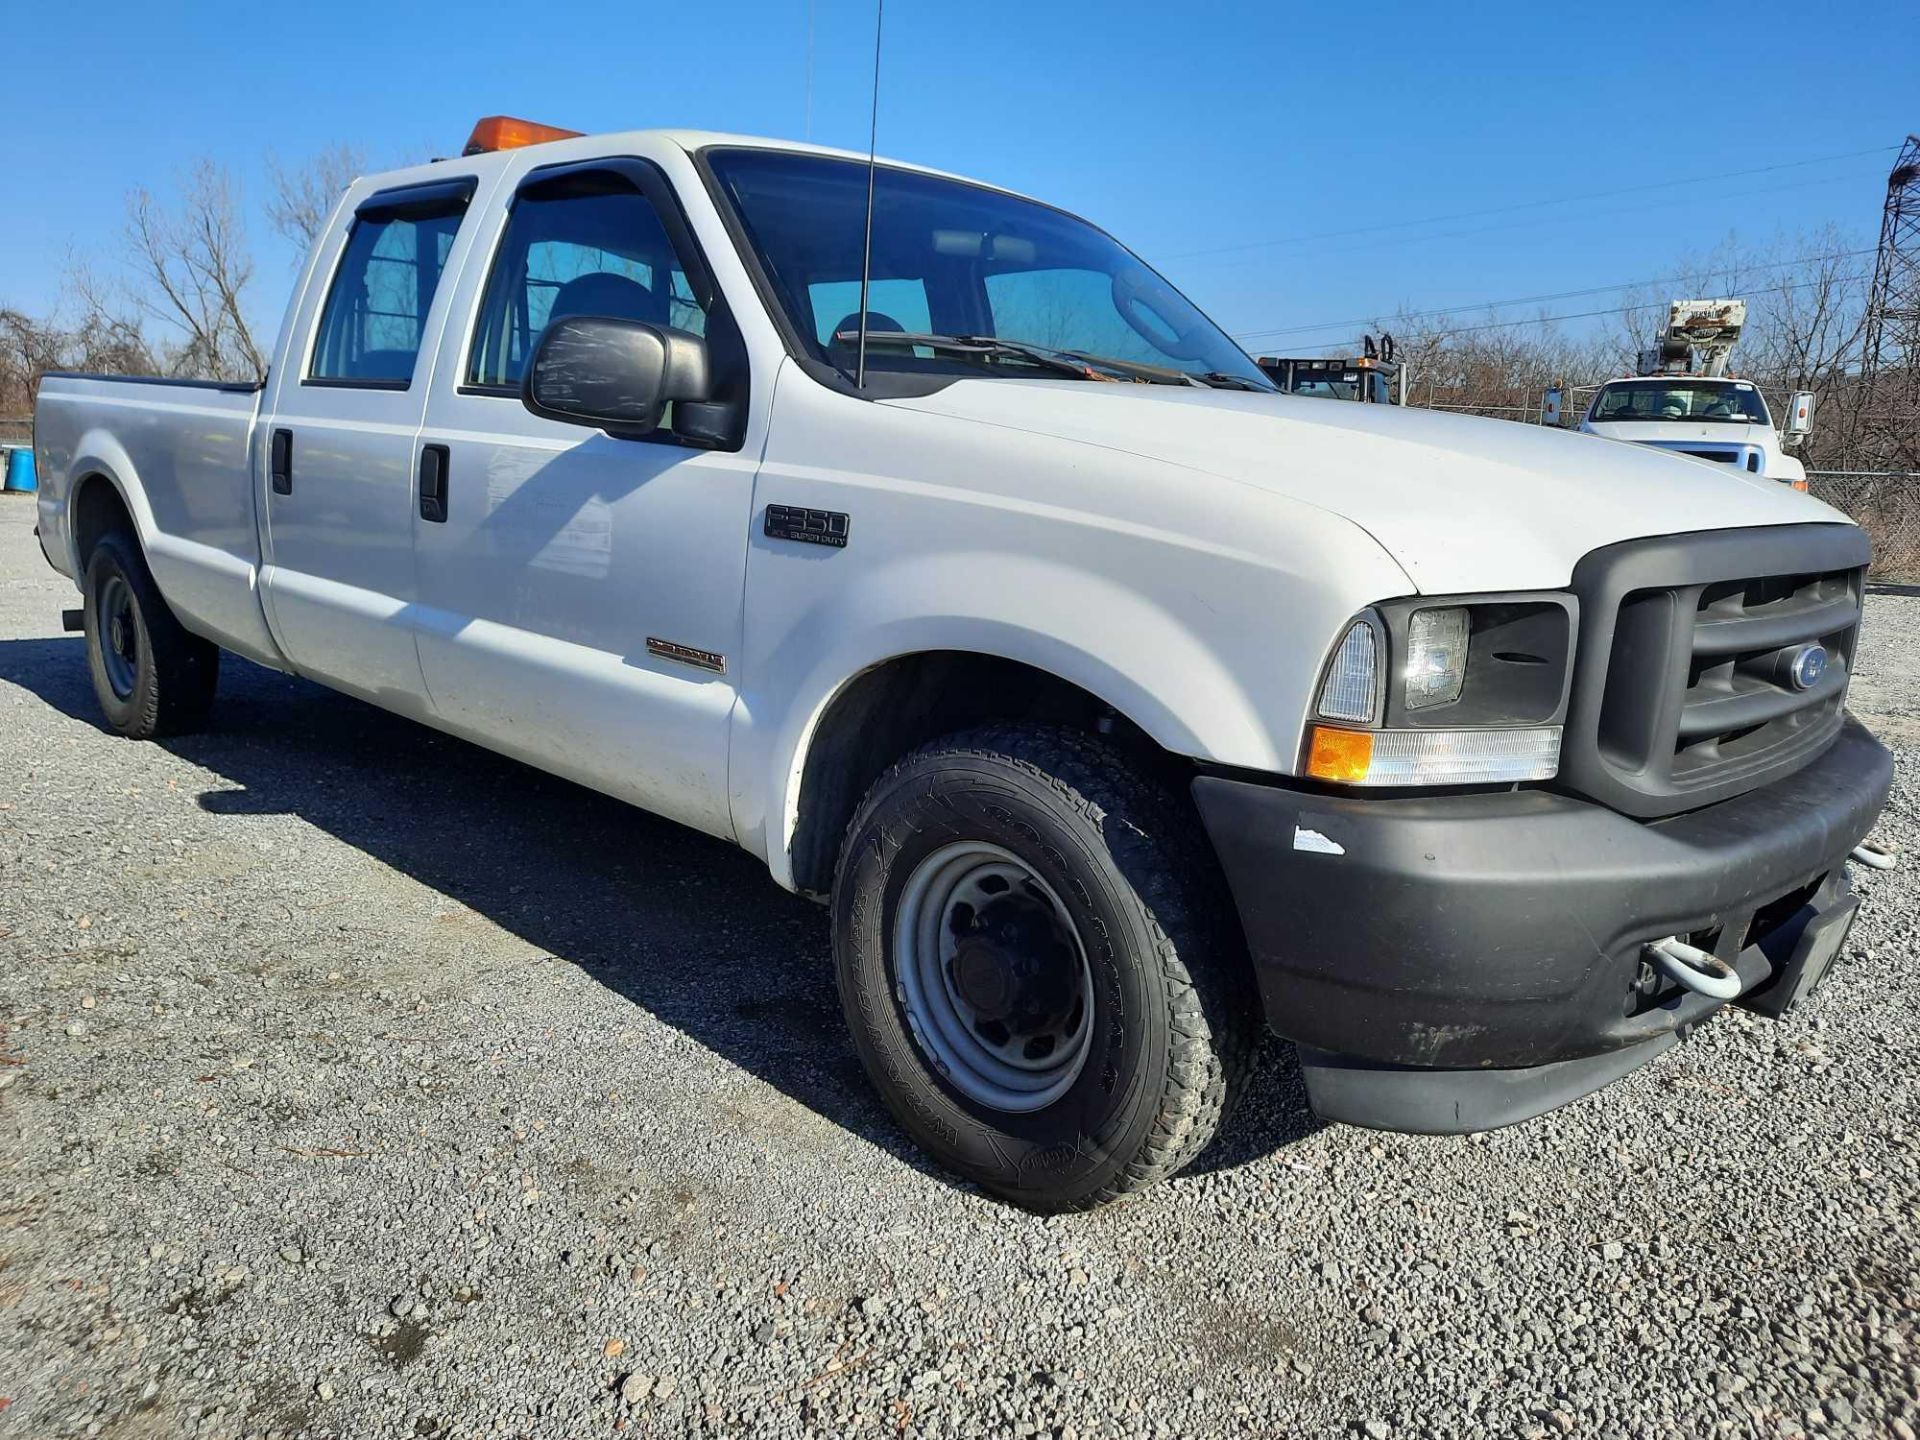 2003 FORD F350 PICK UP TRUCK (VDOT # R06582)